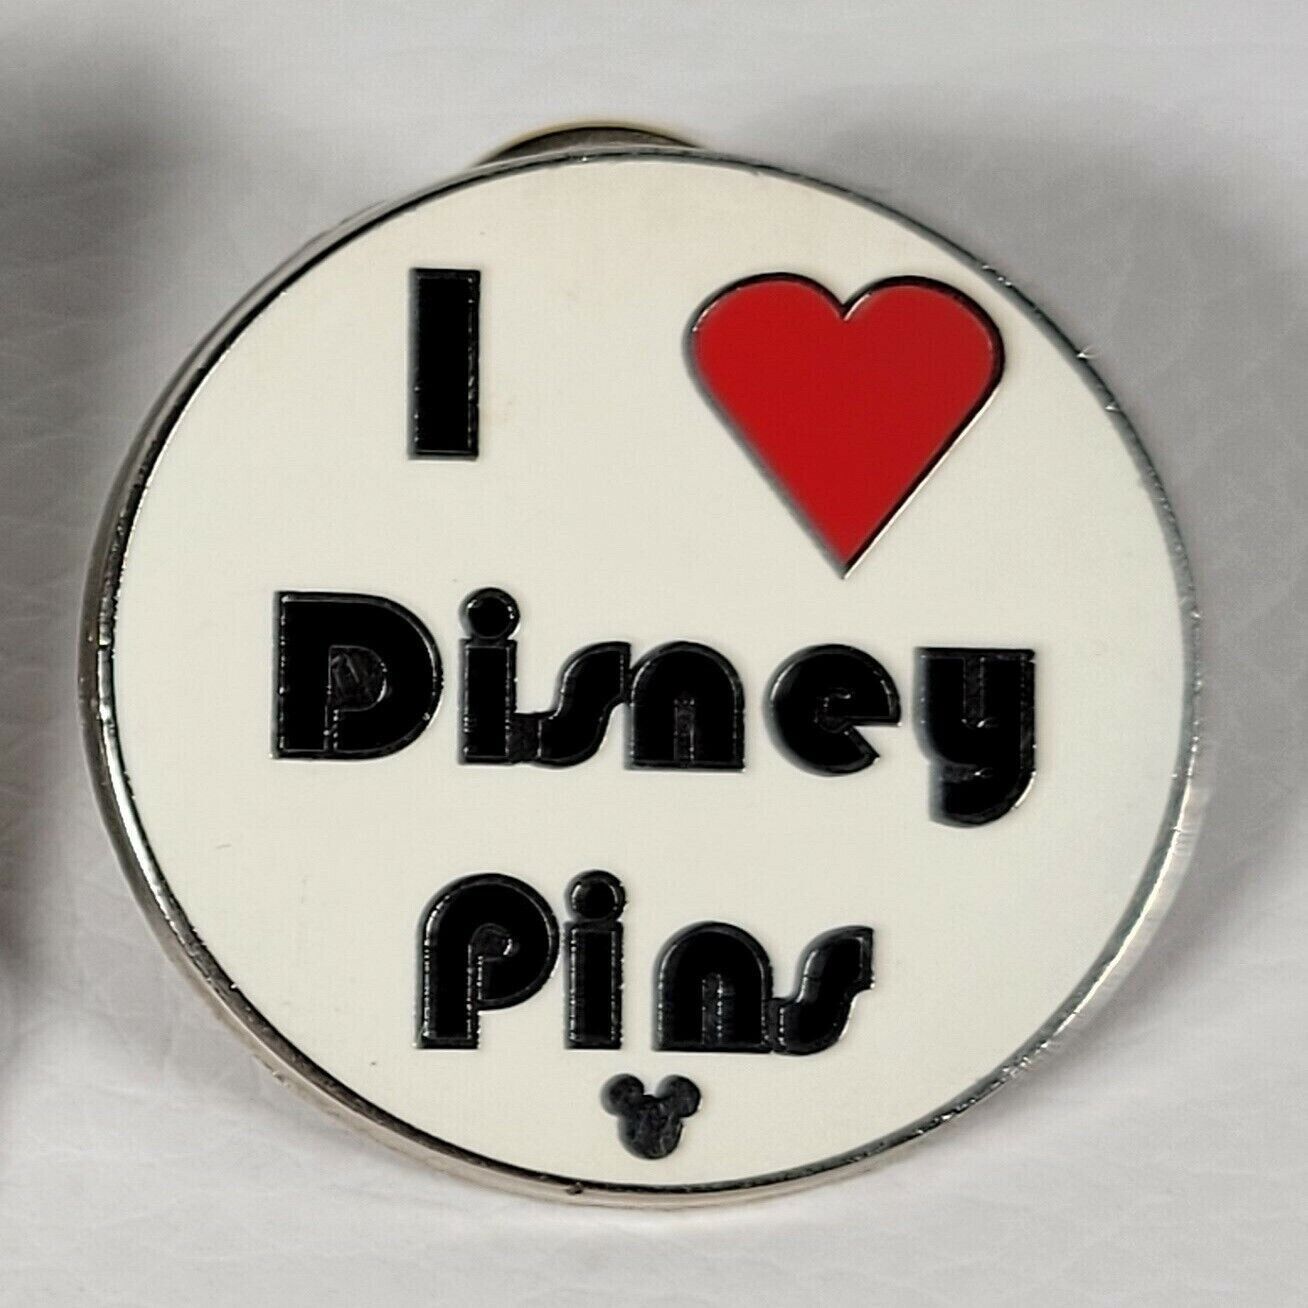 Mickey Mouse Pin From Disney I Love Disney Pins 2010 Authentic - $7.99